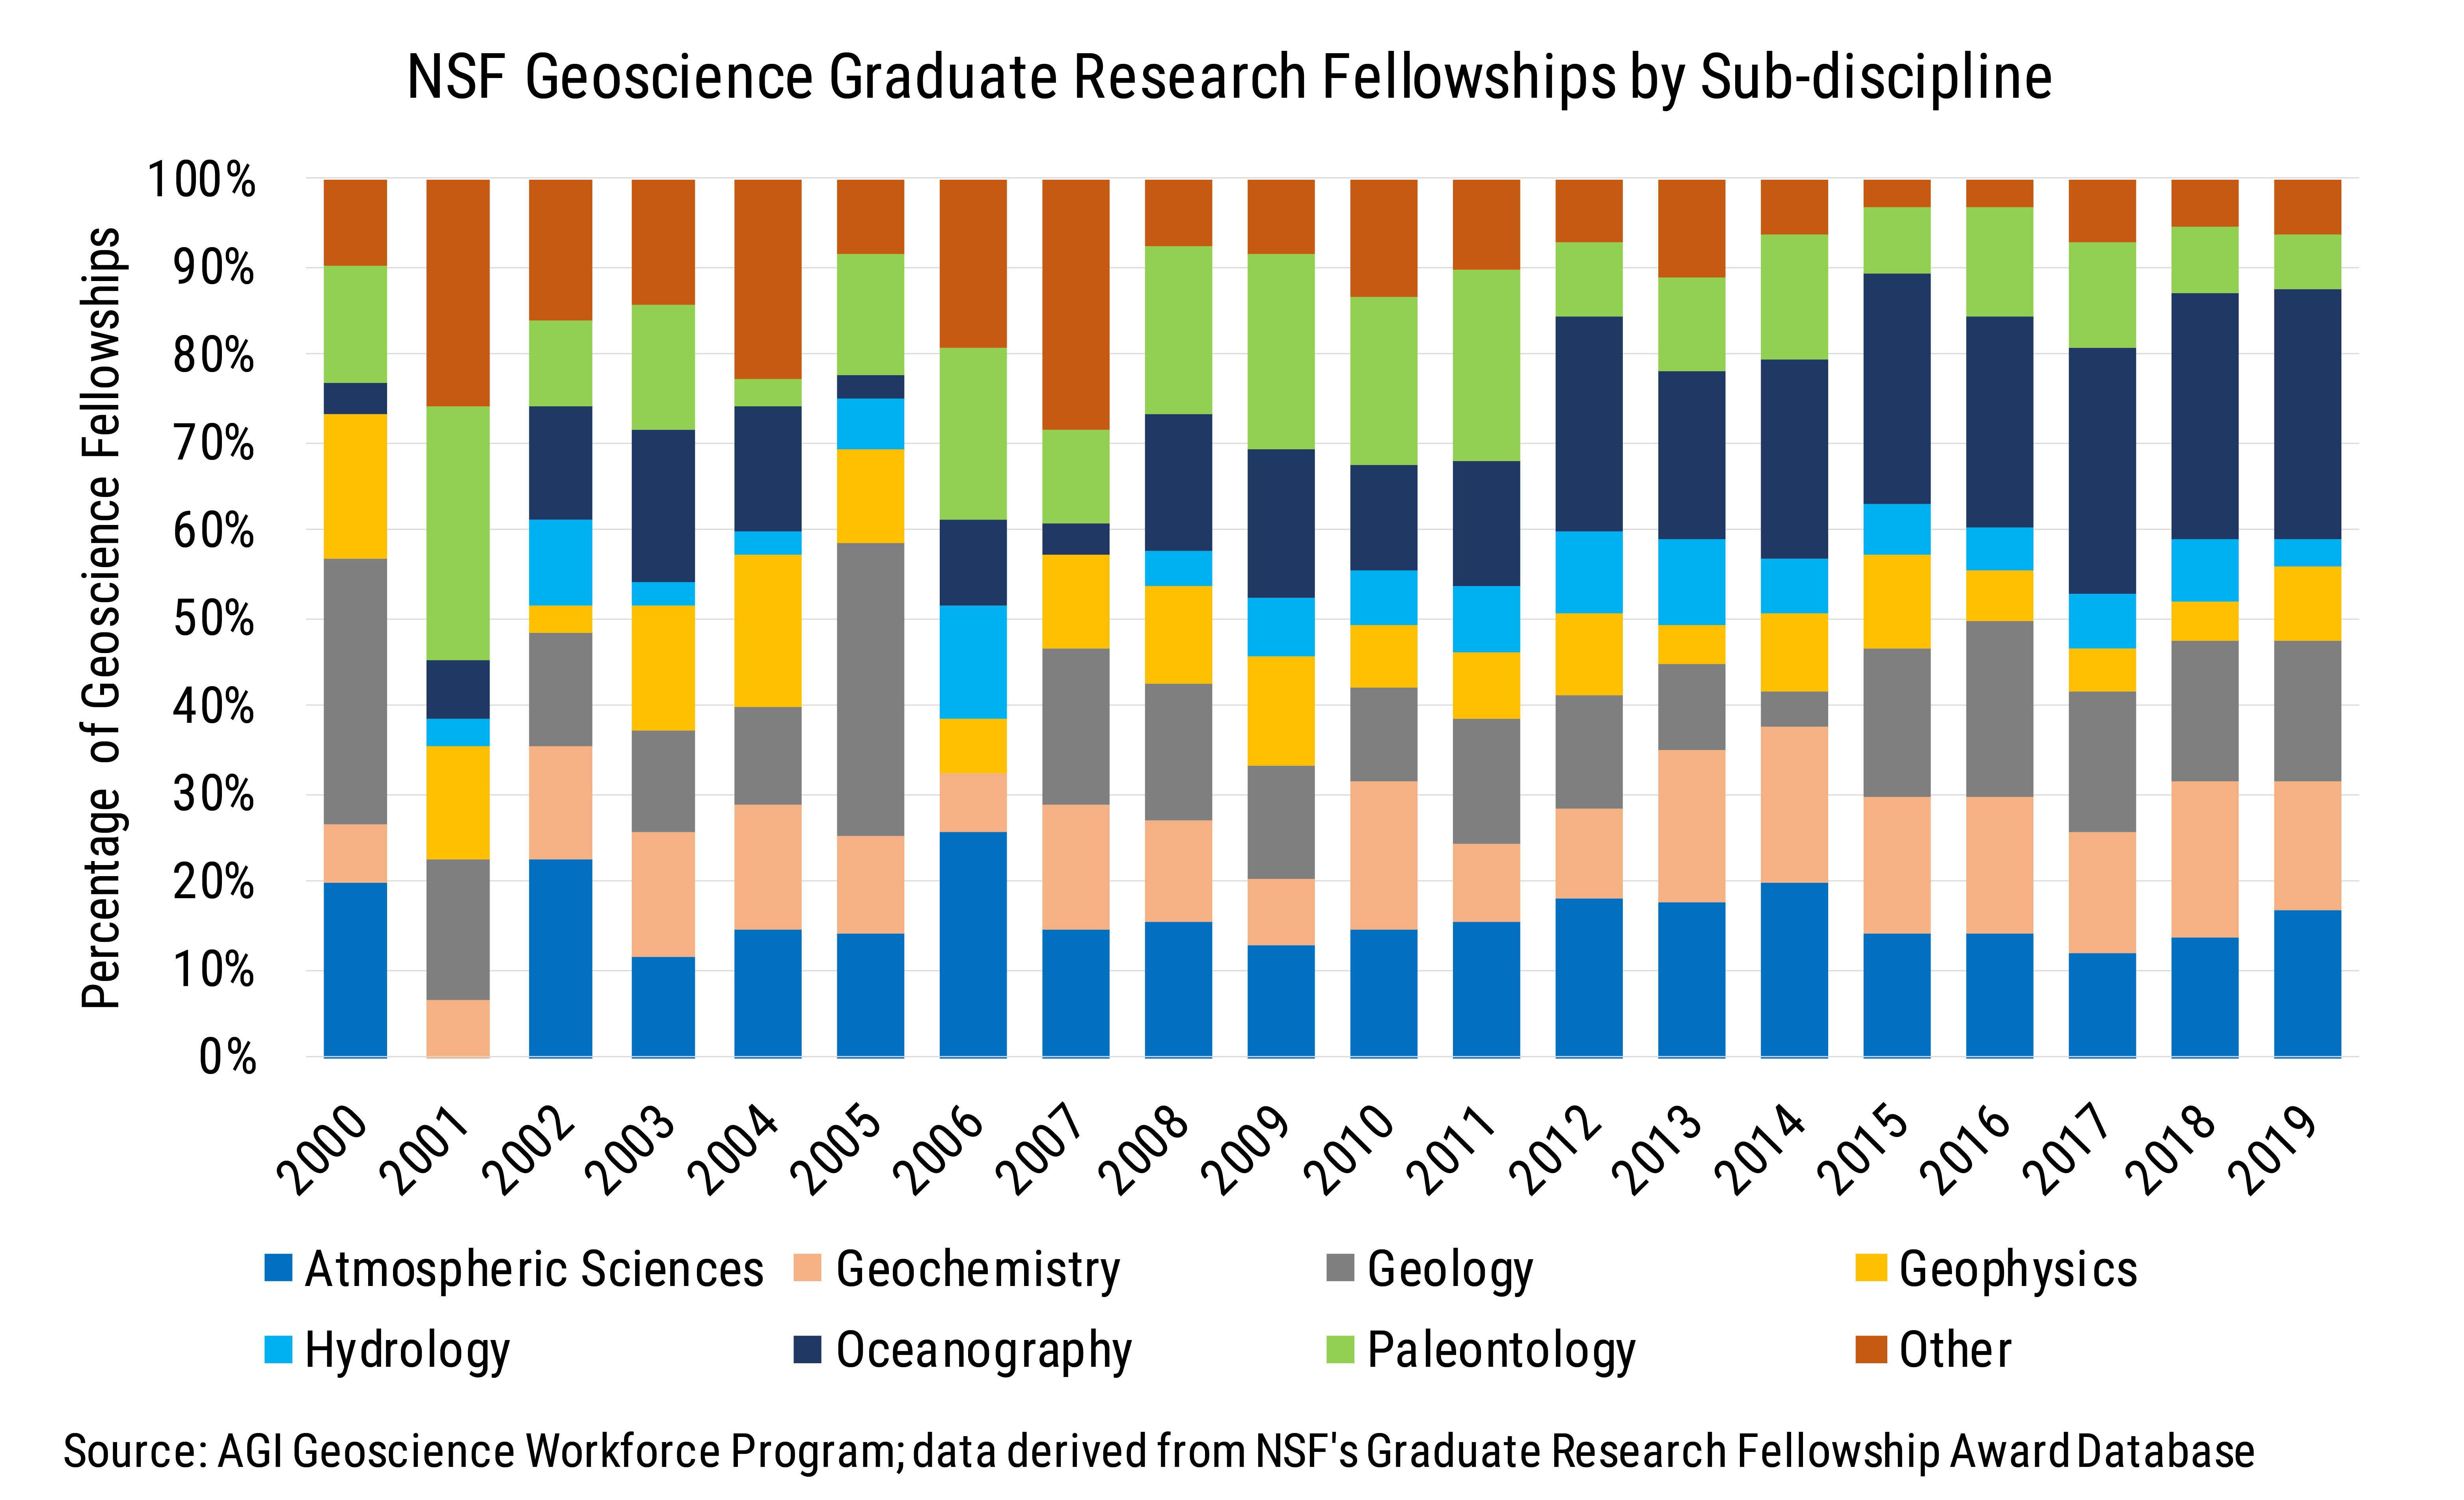 Data Brief 2009-009 chart03: Percentage of NSF Geoscience Graduate Research Fellowships by Sub-discipline